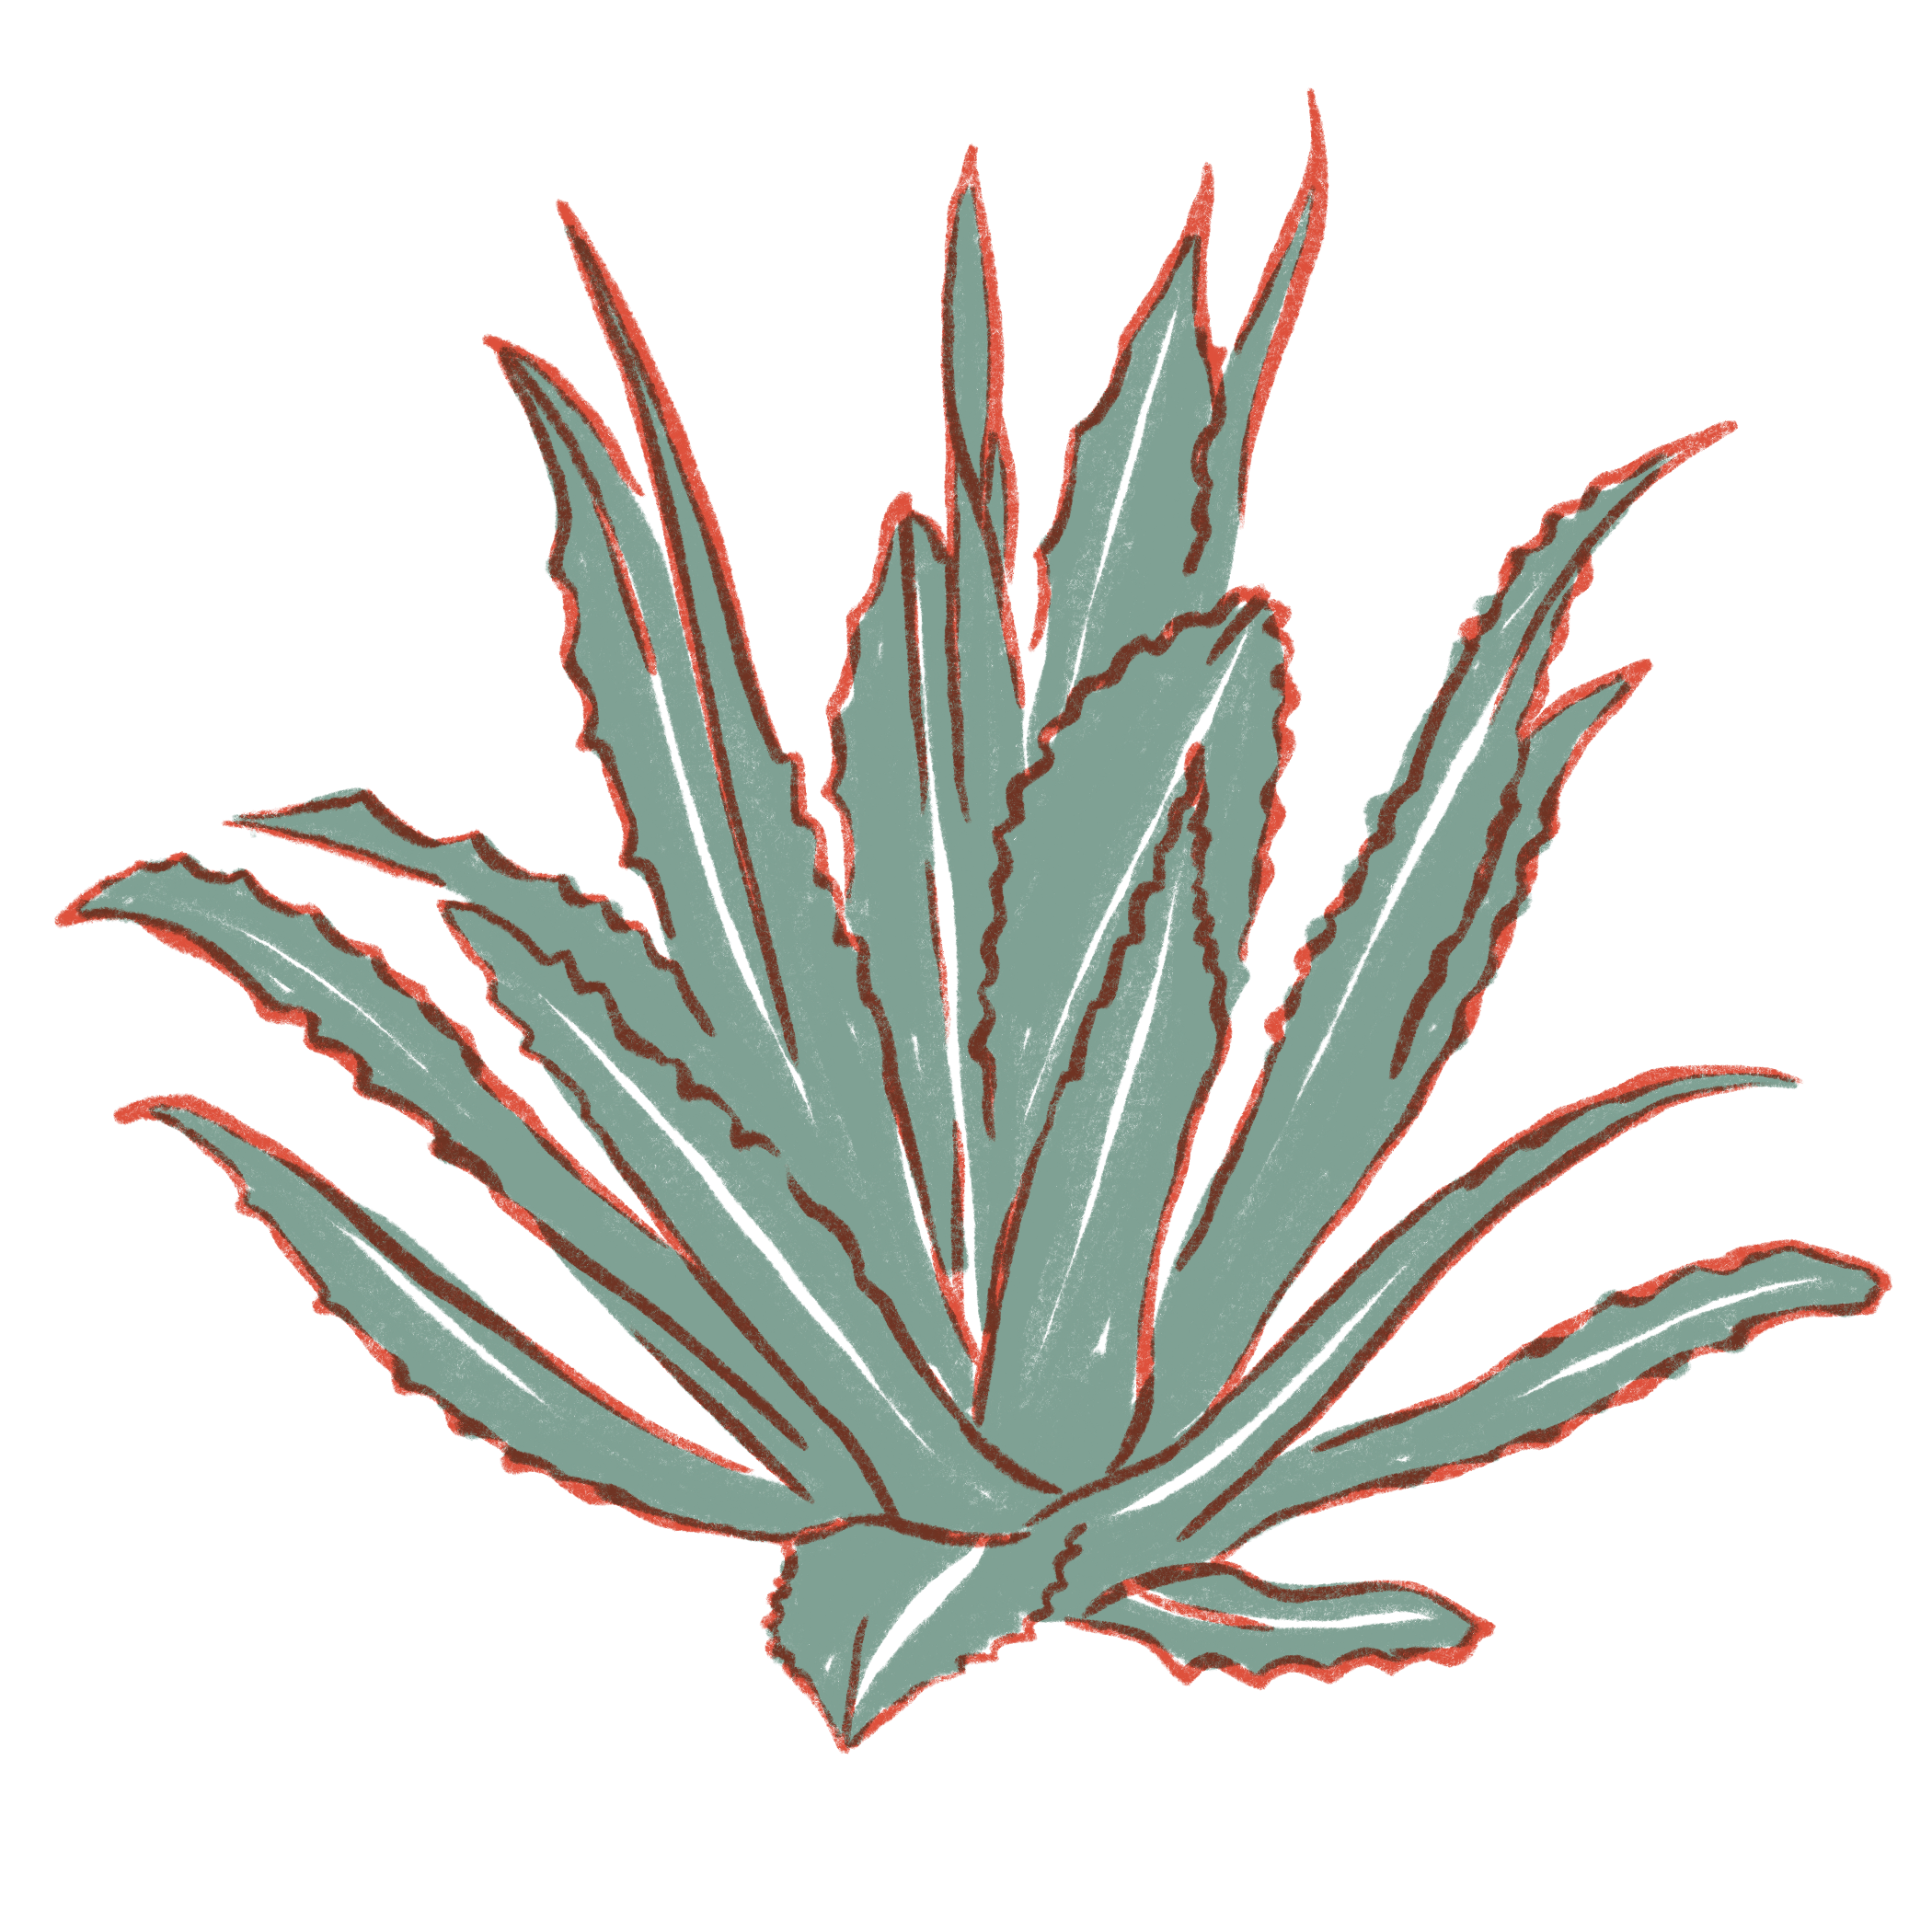 Green & red drawing of an agave plant